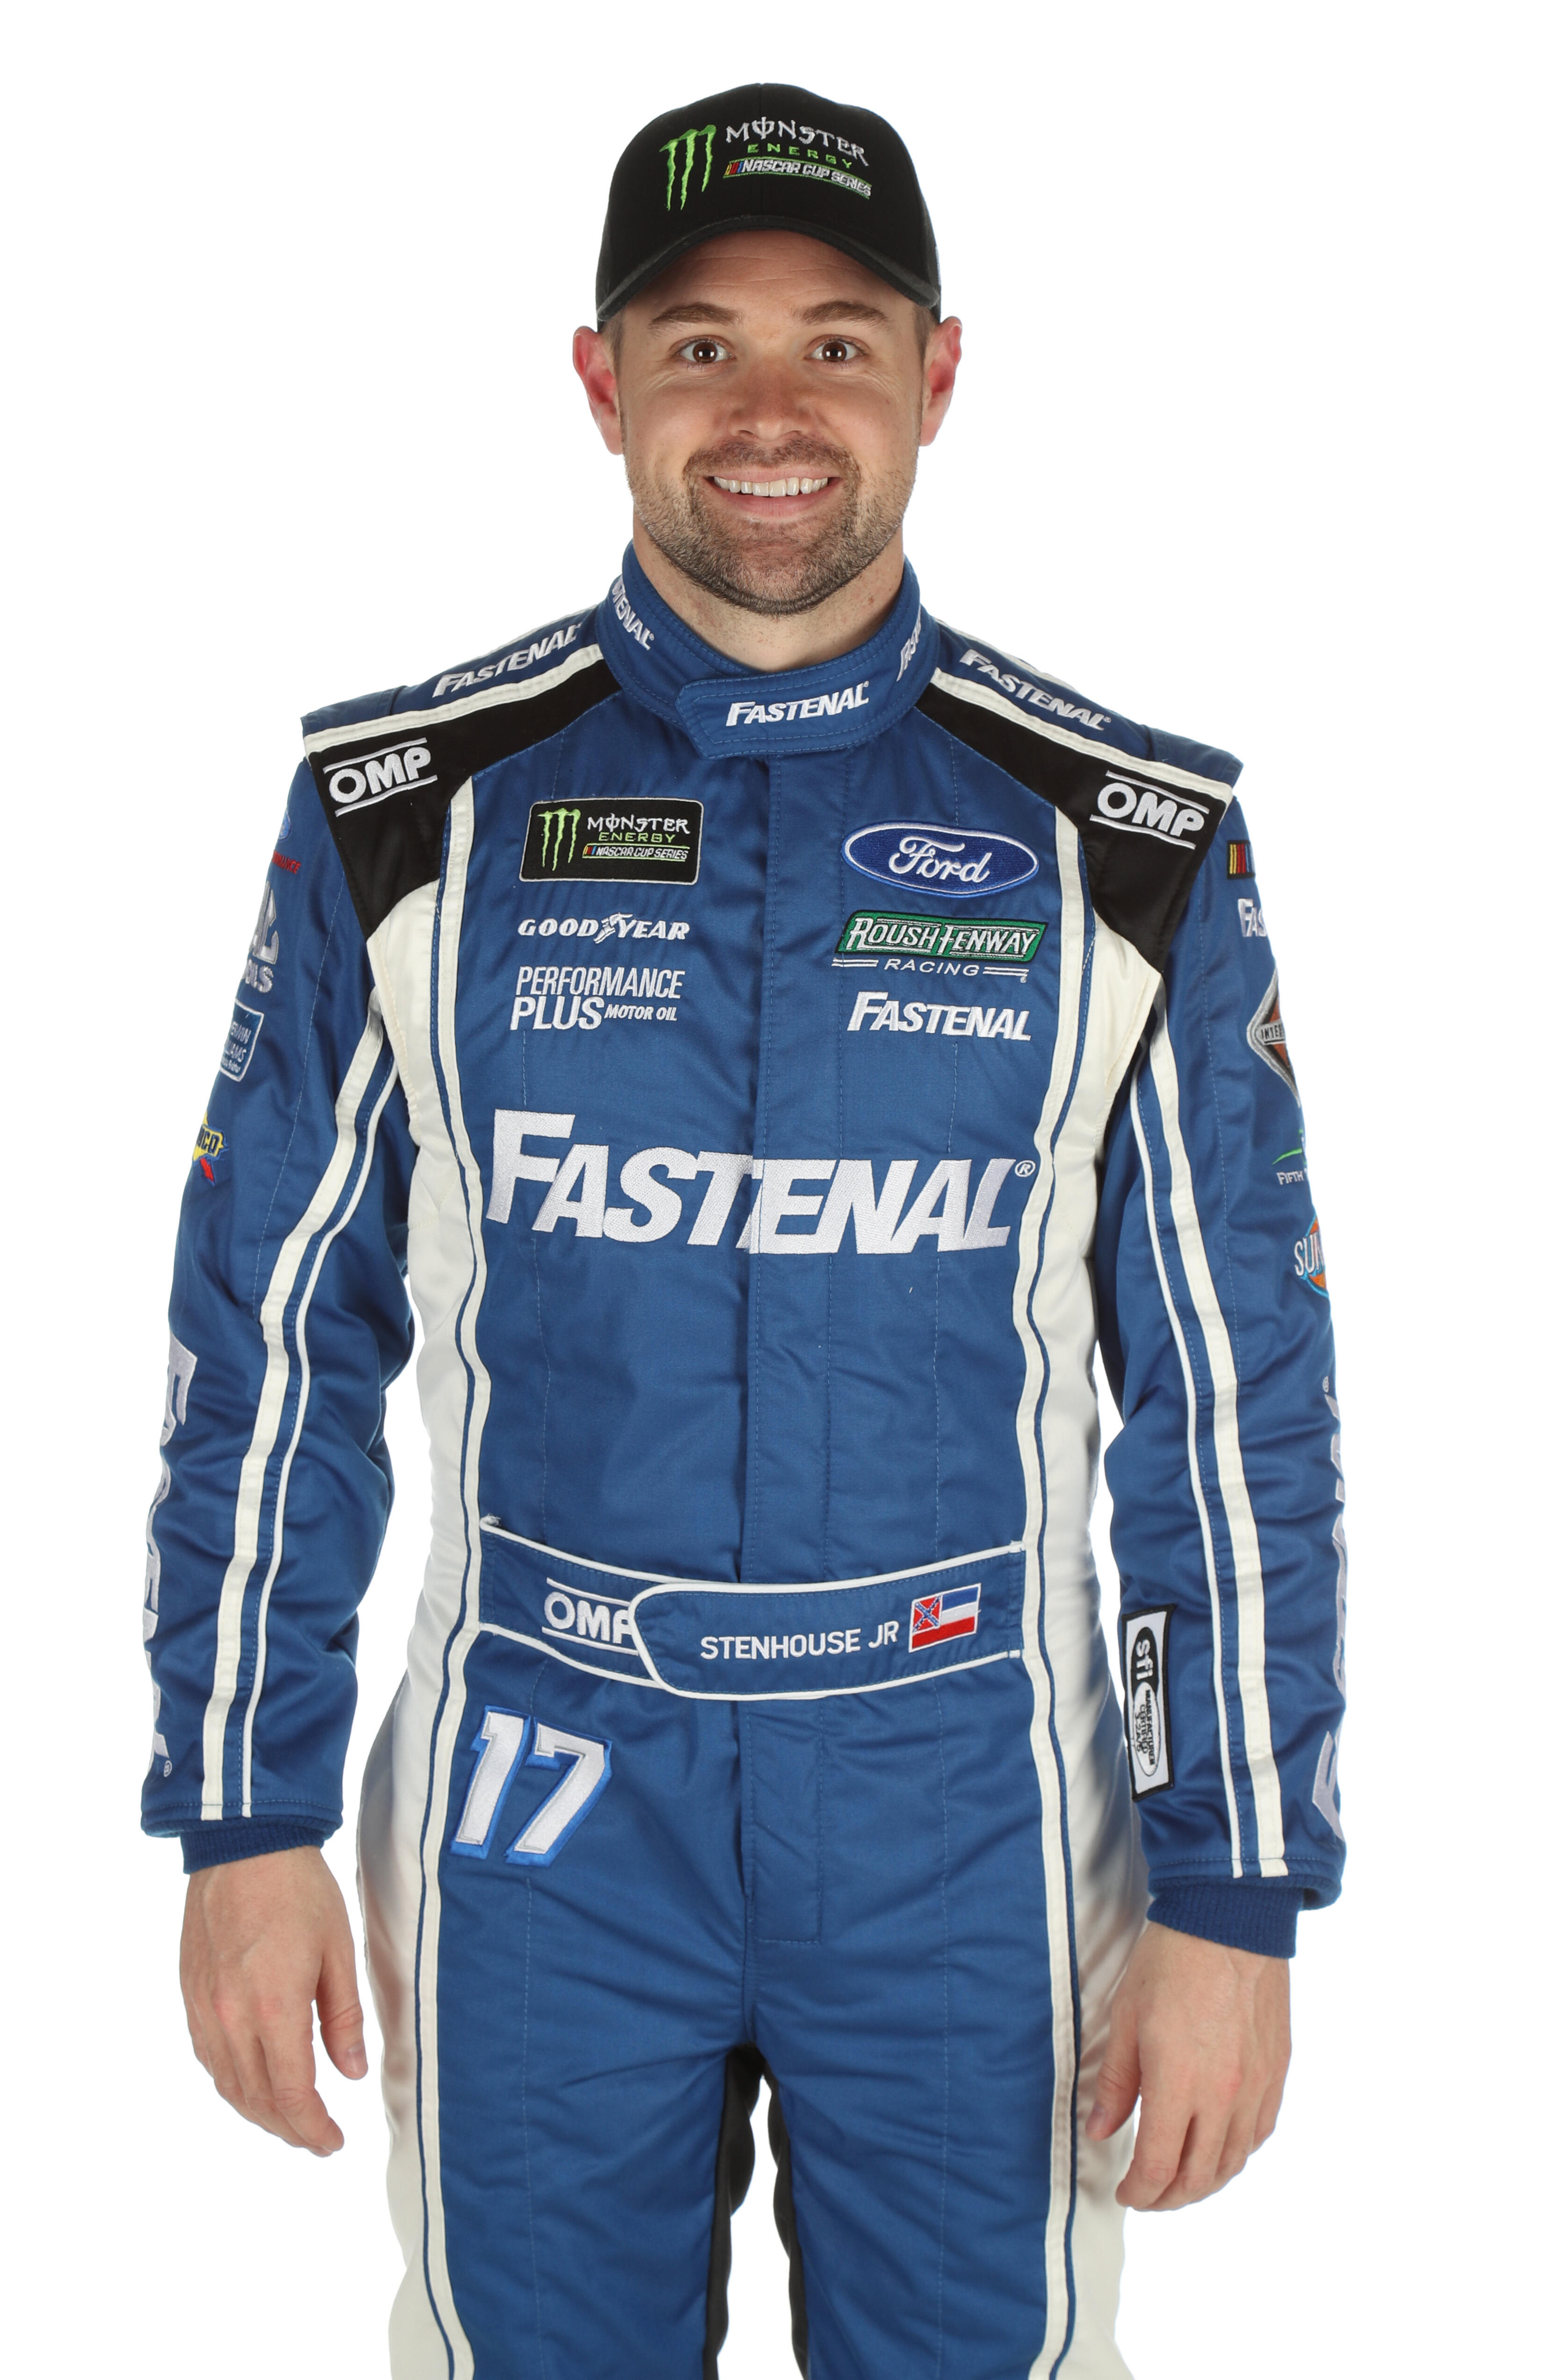 CHARLOTTE, NC - JANUARY 24:  Monster Energy NASCAR Cup Series driver Ricky Stenhouse Jr. poses for a photo during the 2017 Media Tour at the Charlotte Convention Center on January 24, 2017 in Charlotte, North Carolina.  (Photo by Chris Graythen/Getty Imag